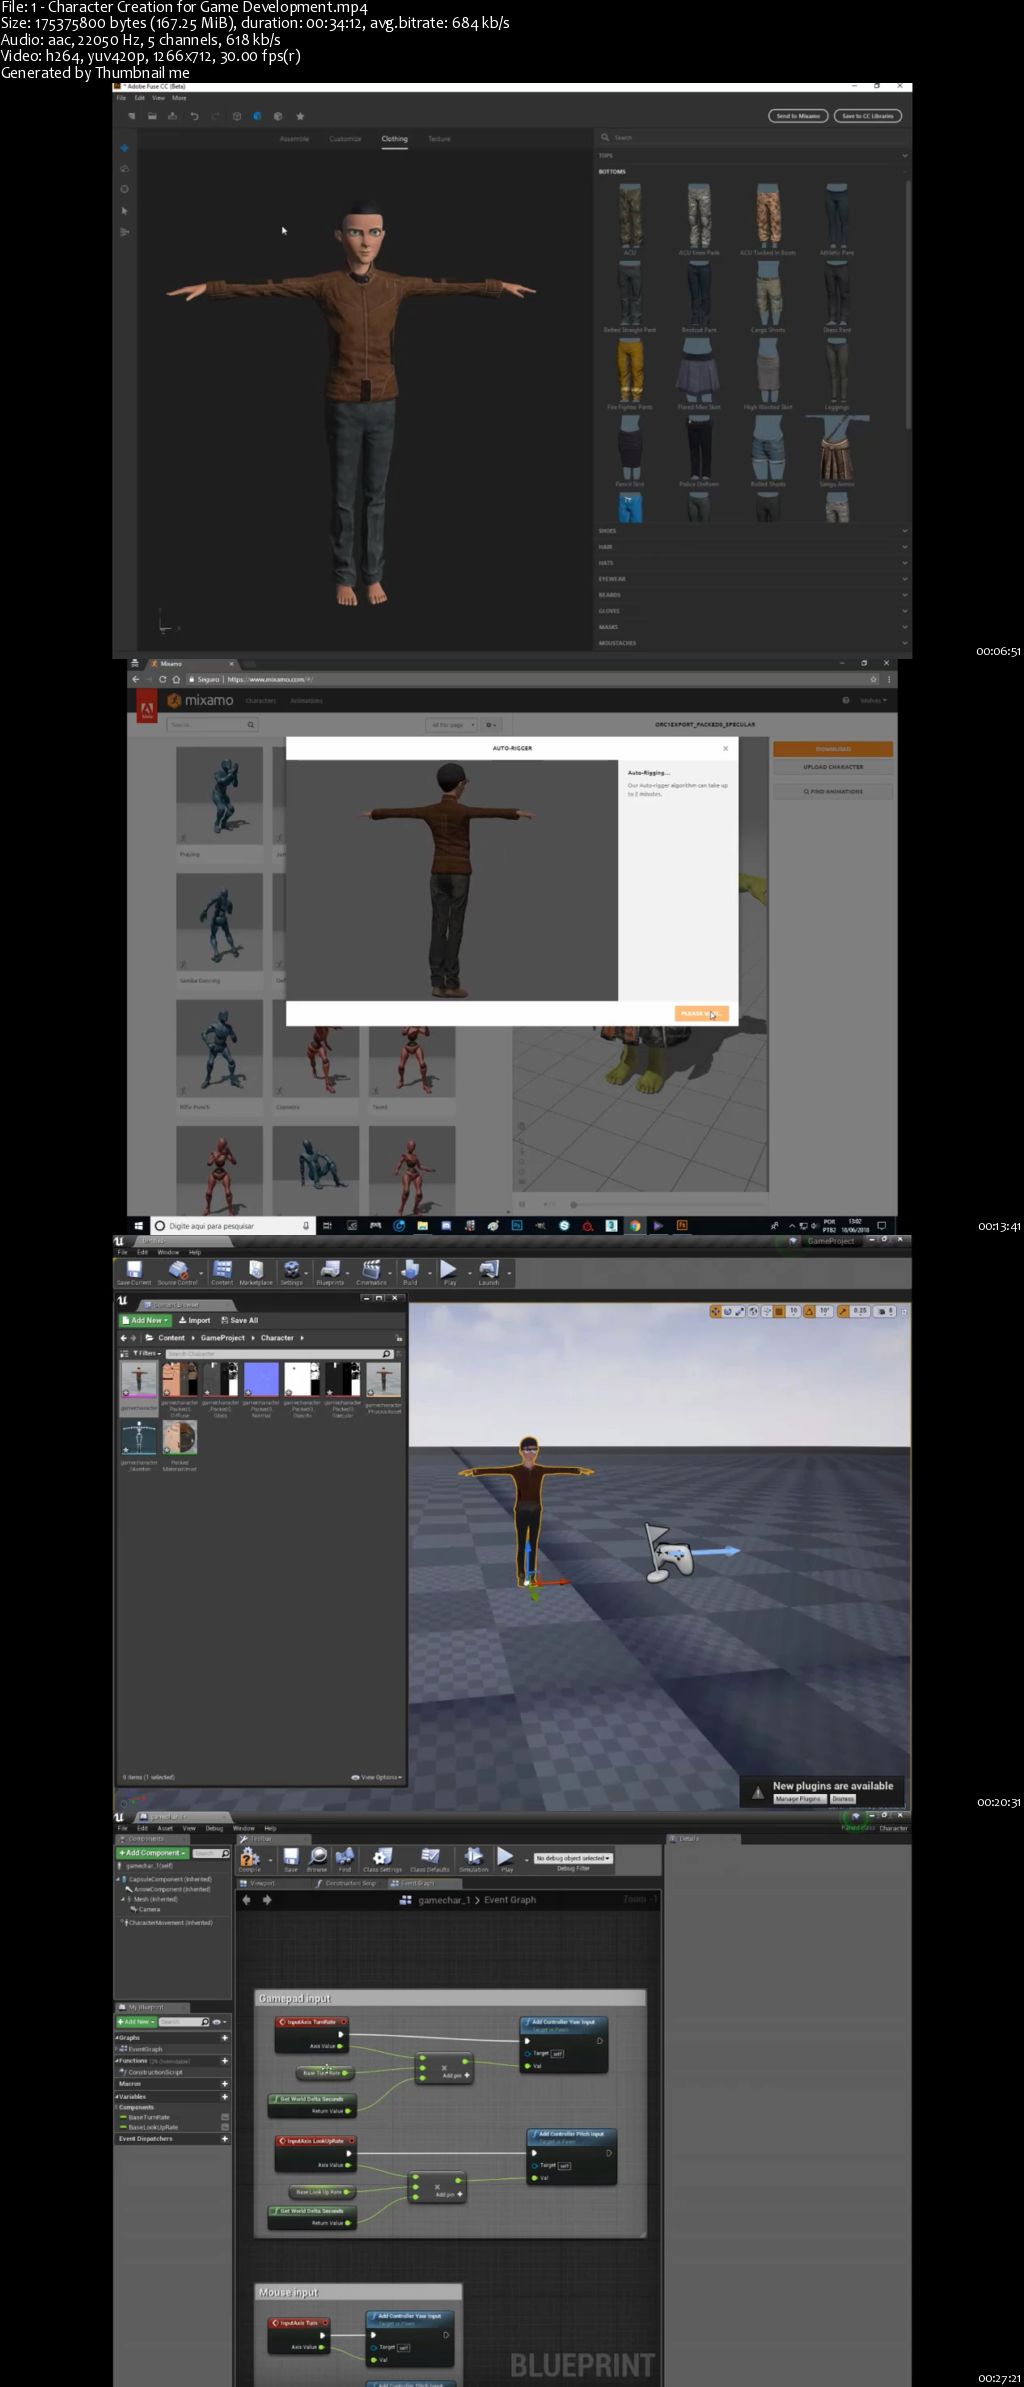 Game Development with Unreal Engine 4, Adobe Fuse, 3ds Max, and Mixamo